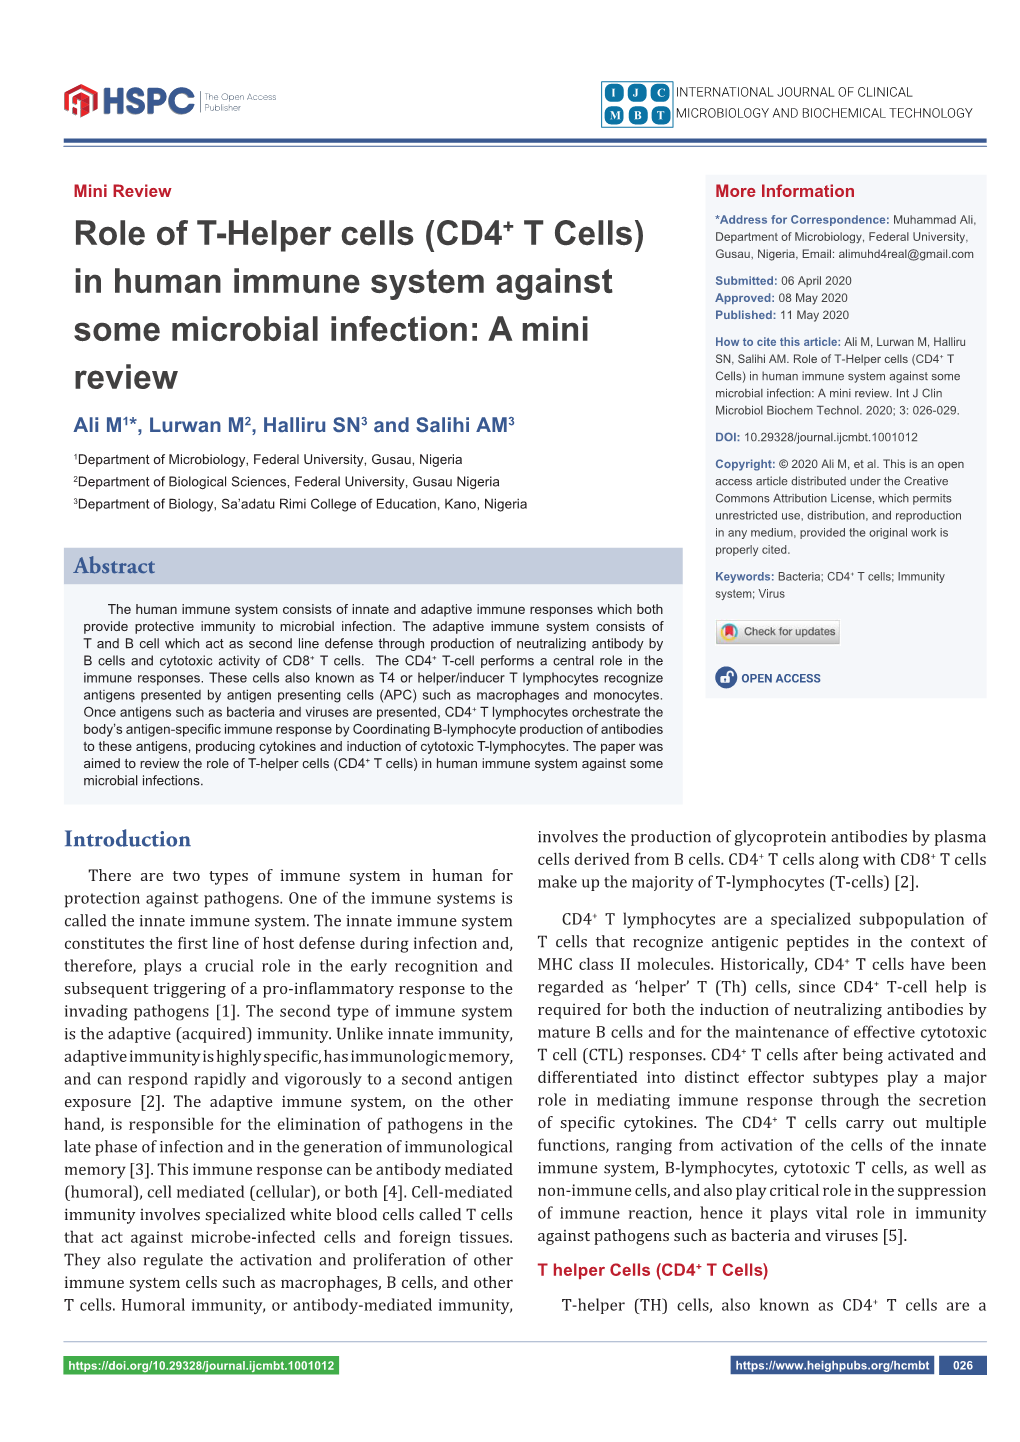 Role of T-Helper Cells (CD4+ T Cells) in Human Immune System Against Some Review Microbial Infection: a Mini Review